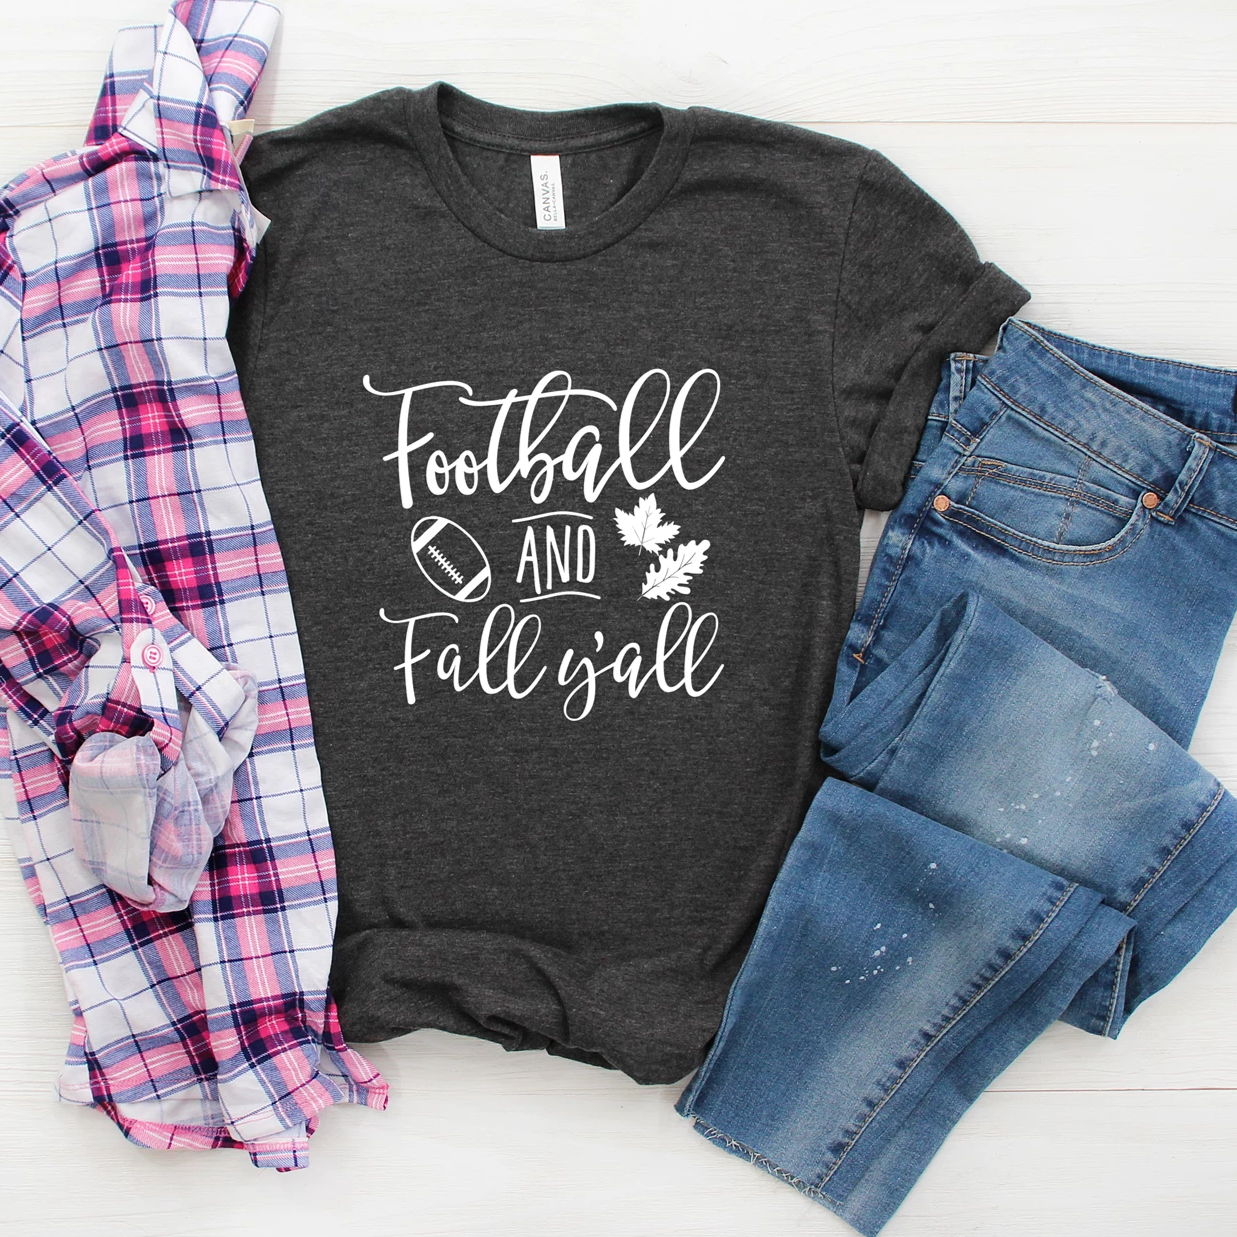 Football and Fall Y'all Tee